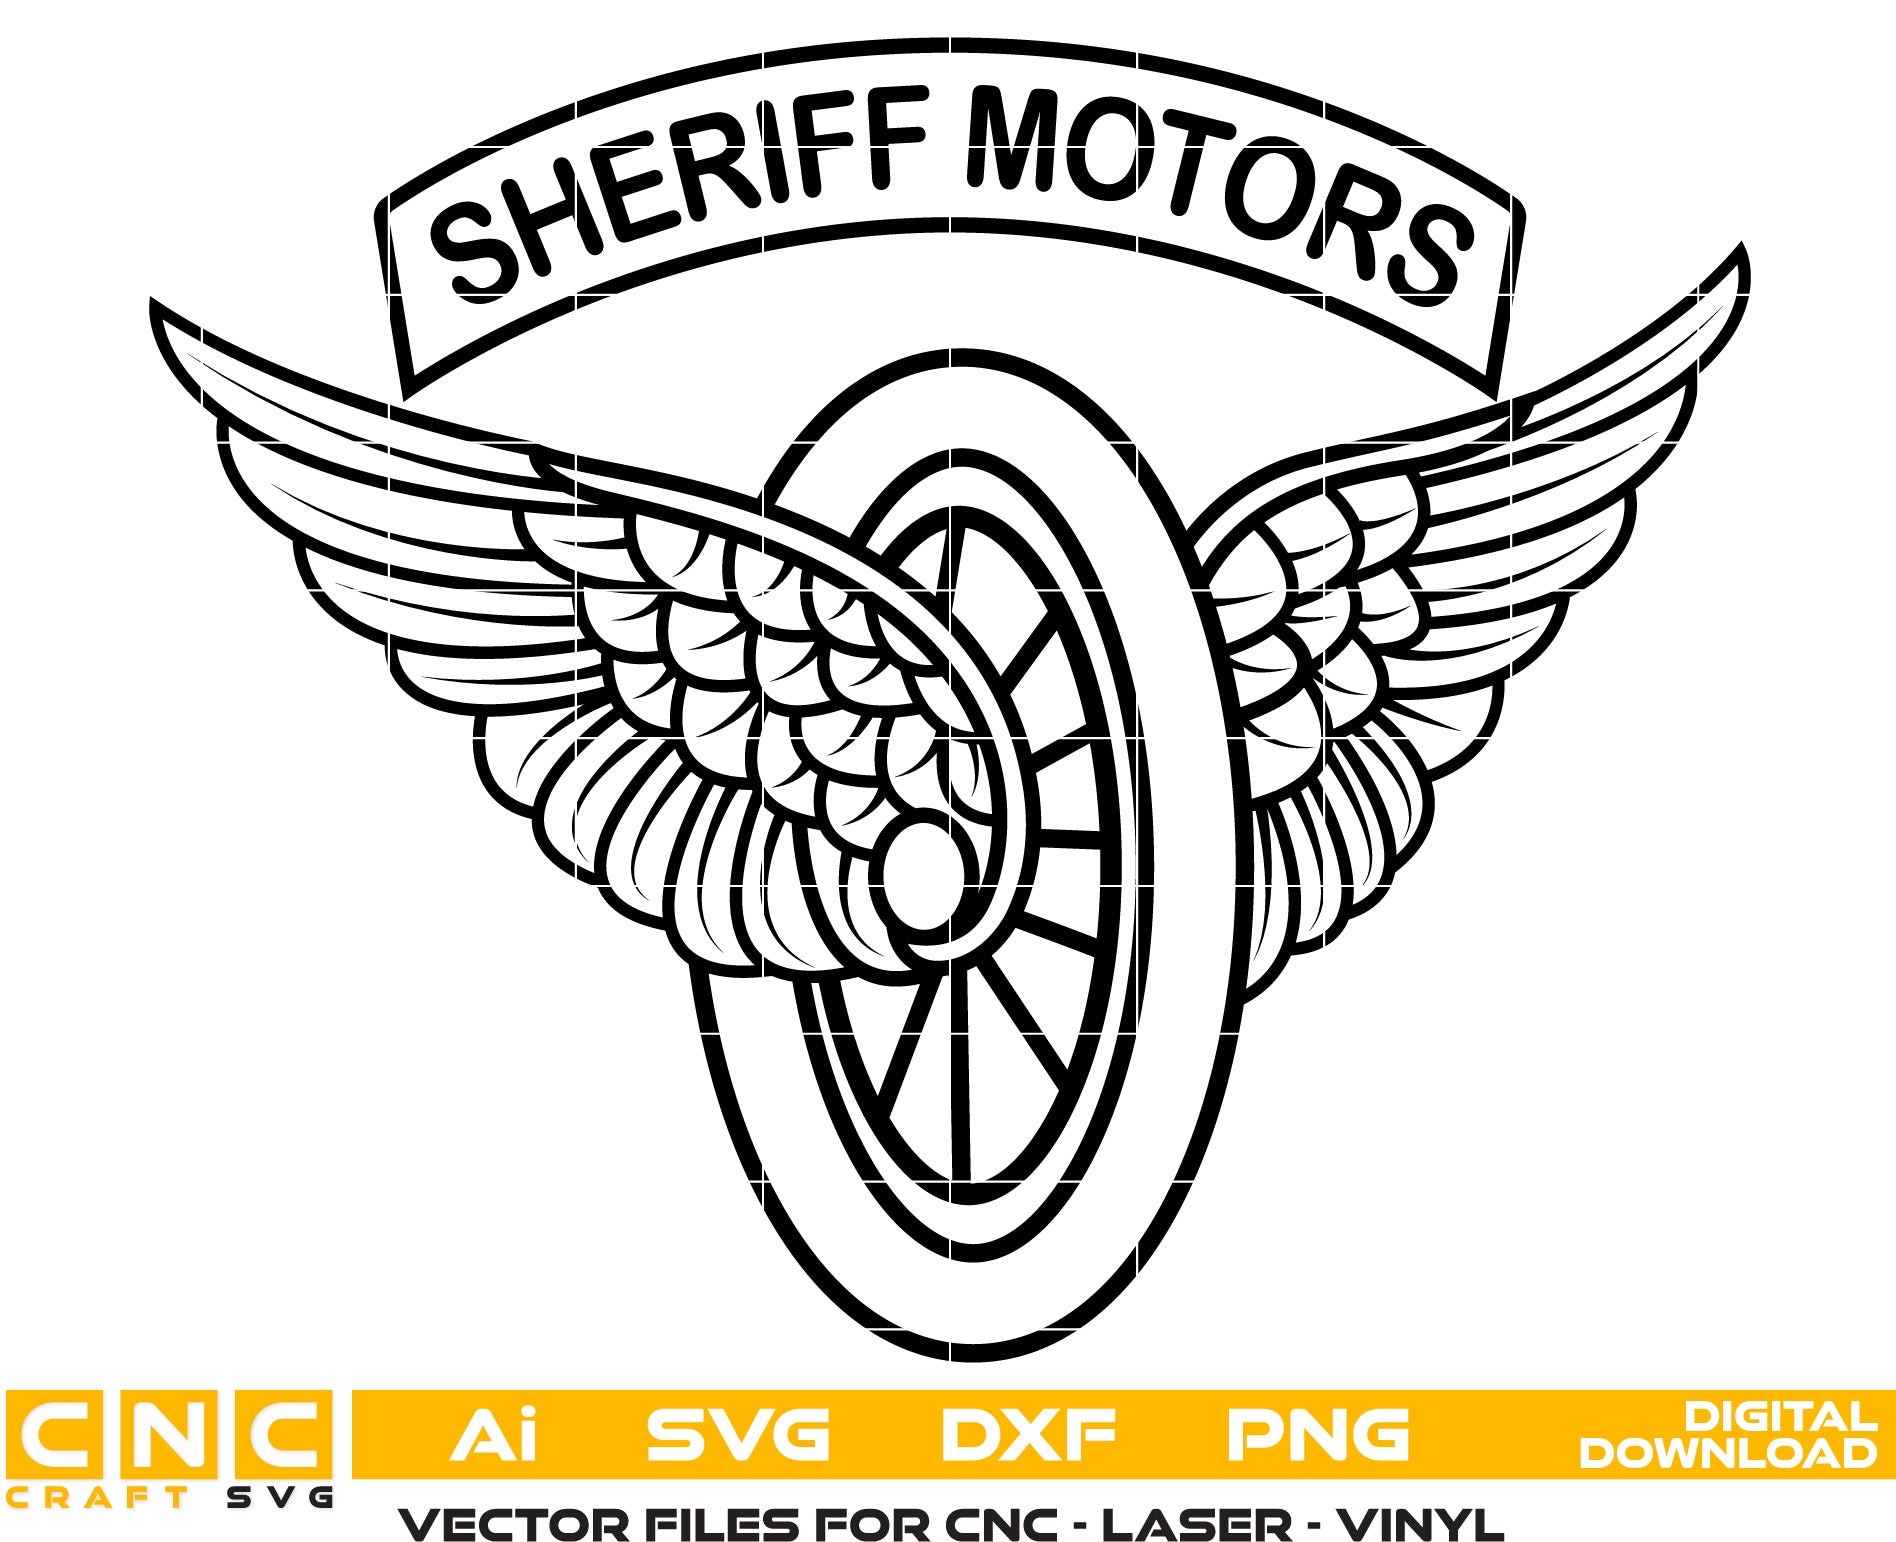 Sheriff Motors Logo Vector Art, Ai,SVG, DXF, PNG, Digital Files for Laser Engraving, Woodworking, Printing, CNC Router, Cricut, Ezecad etc.